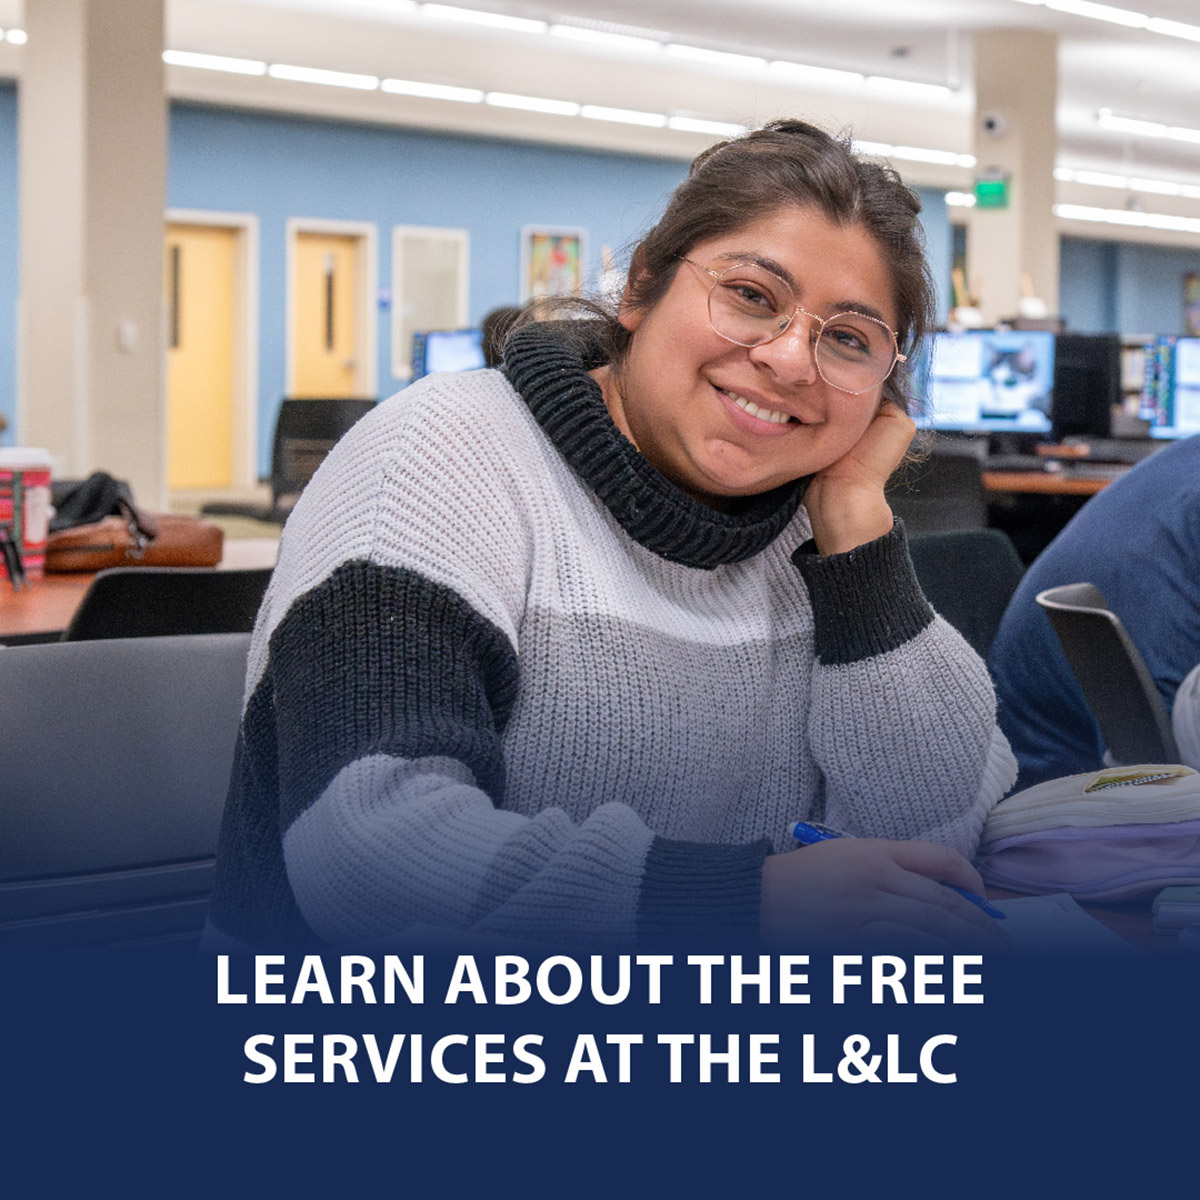 The MJC Library & Learning Center Welcomes You!